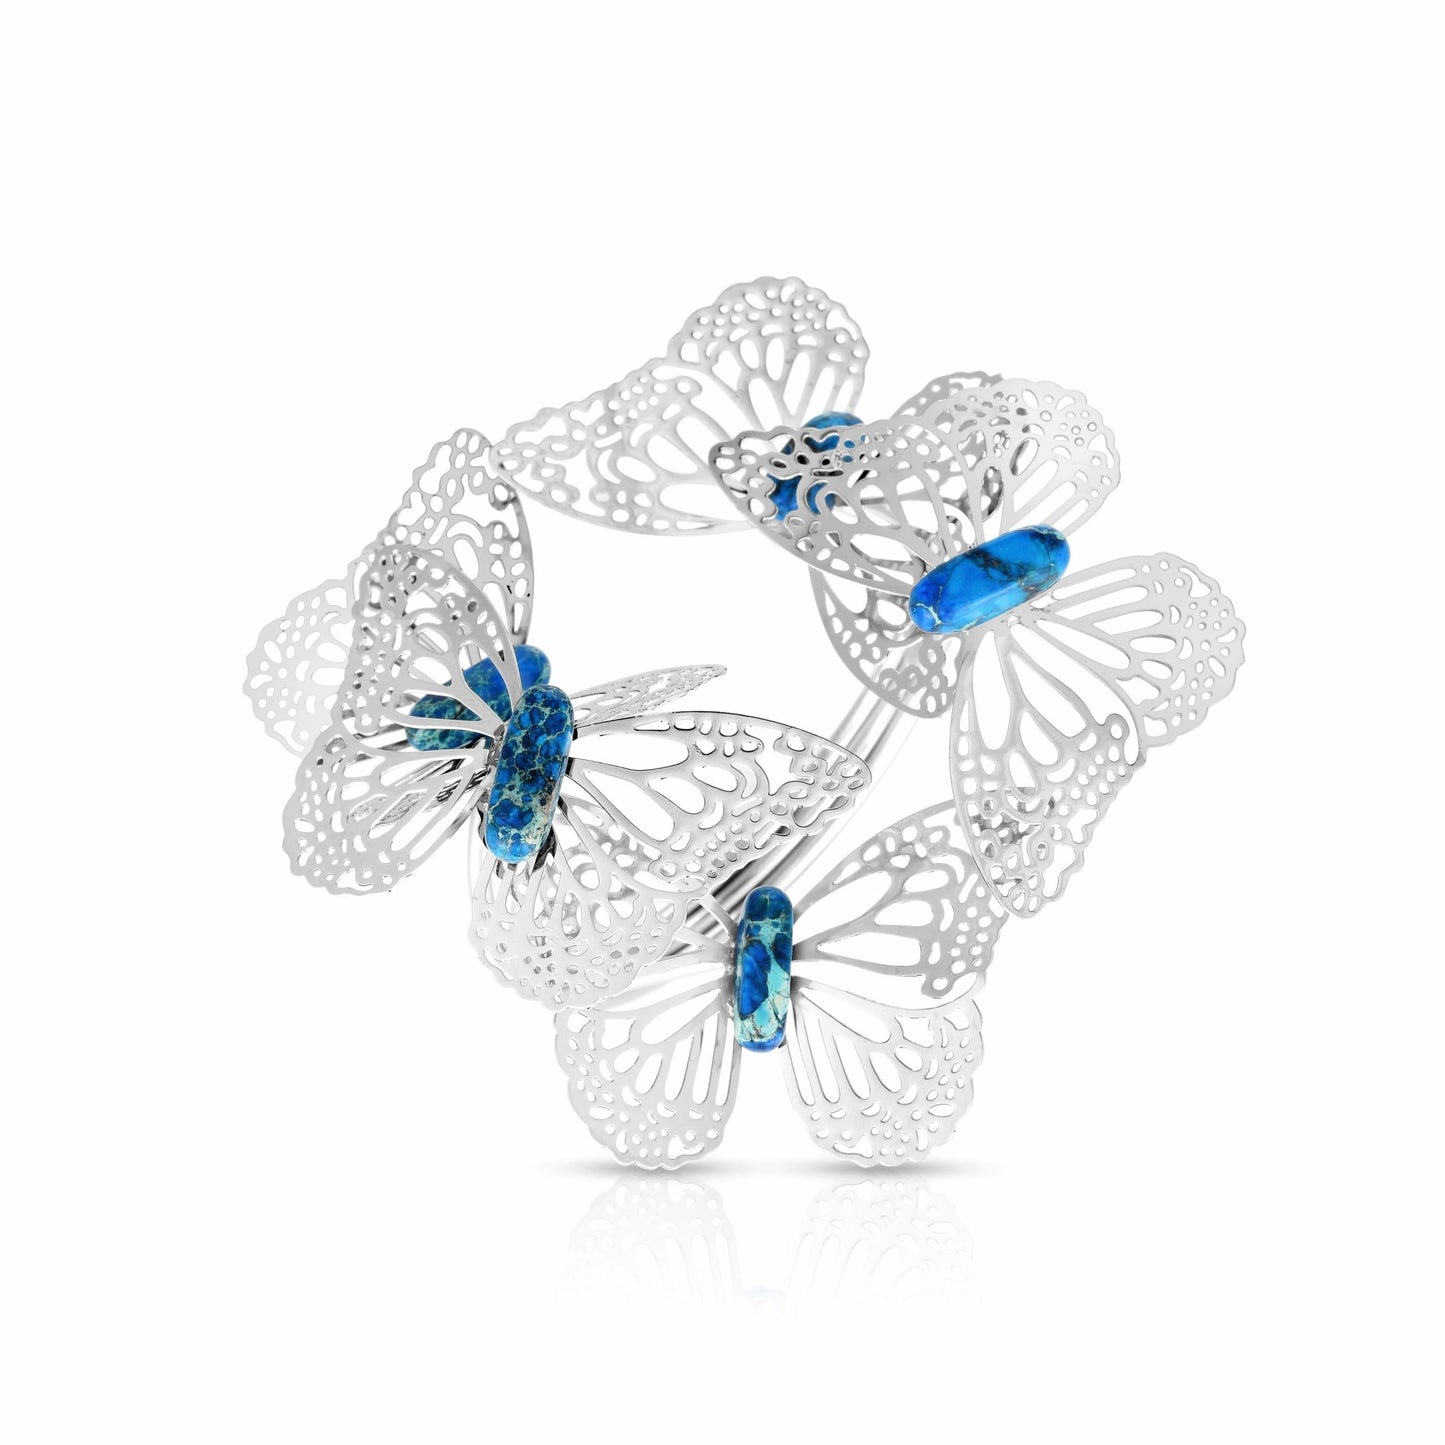 Butterfly Party Silver Napkin Rings, set of 4